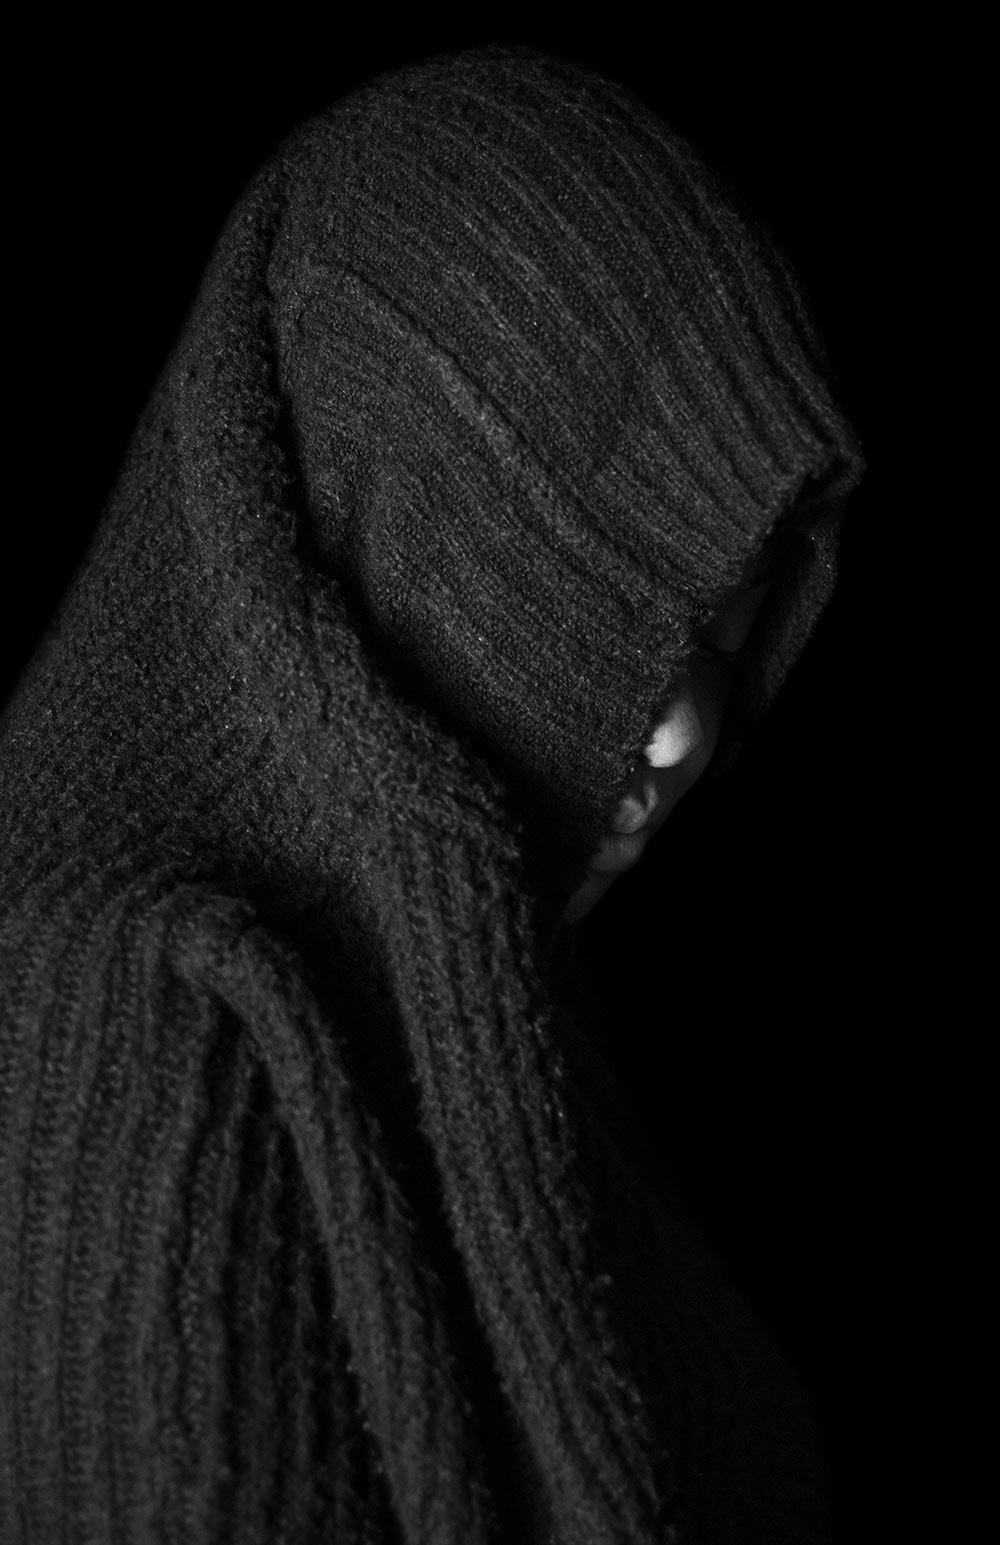 black and white shot of person covering head with sweater hood